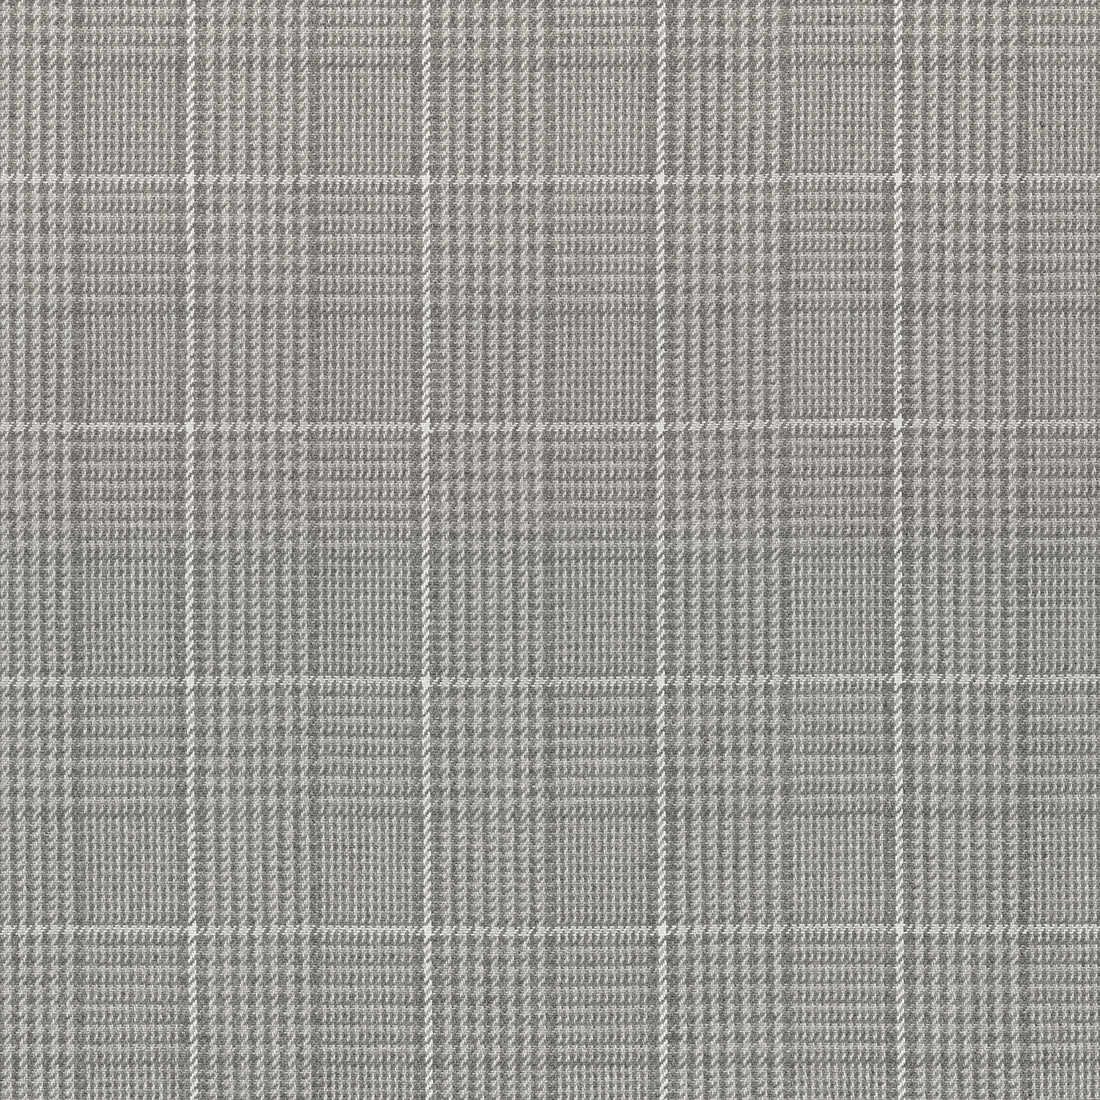 Grassmarket Check fabric in grey color - pattern number W710200 - by Thibaut in the Colony collection